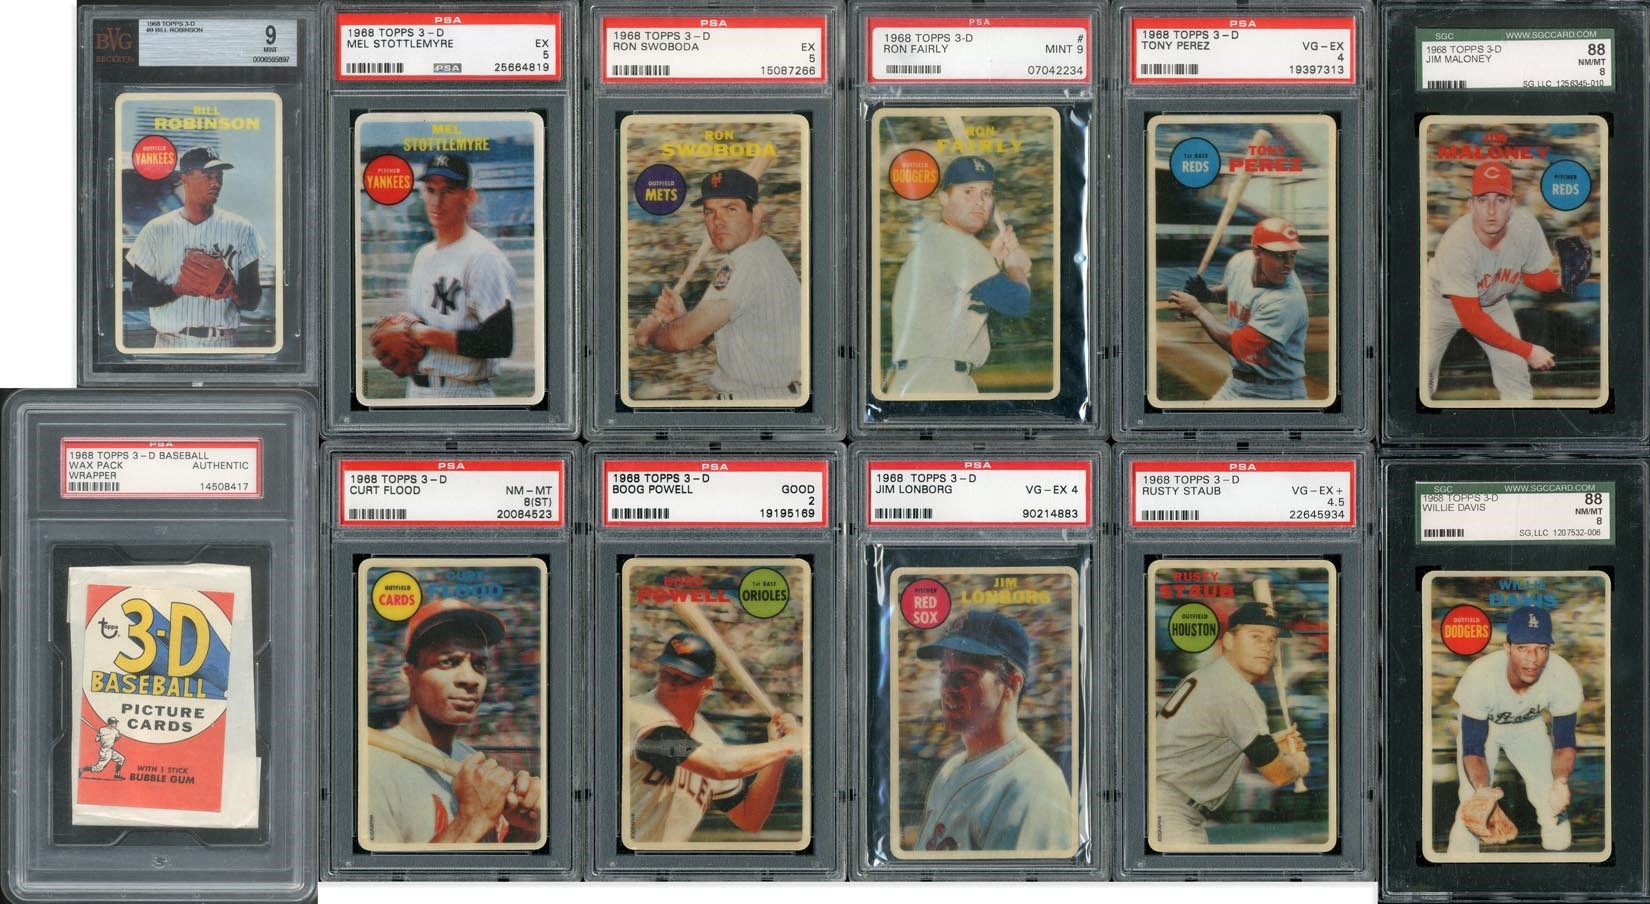 1968 Topps 3-D Near-Complete Graded Set Minus One with Wrapper